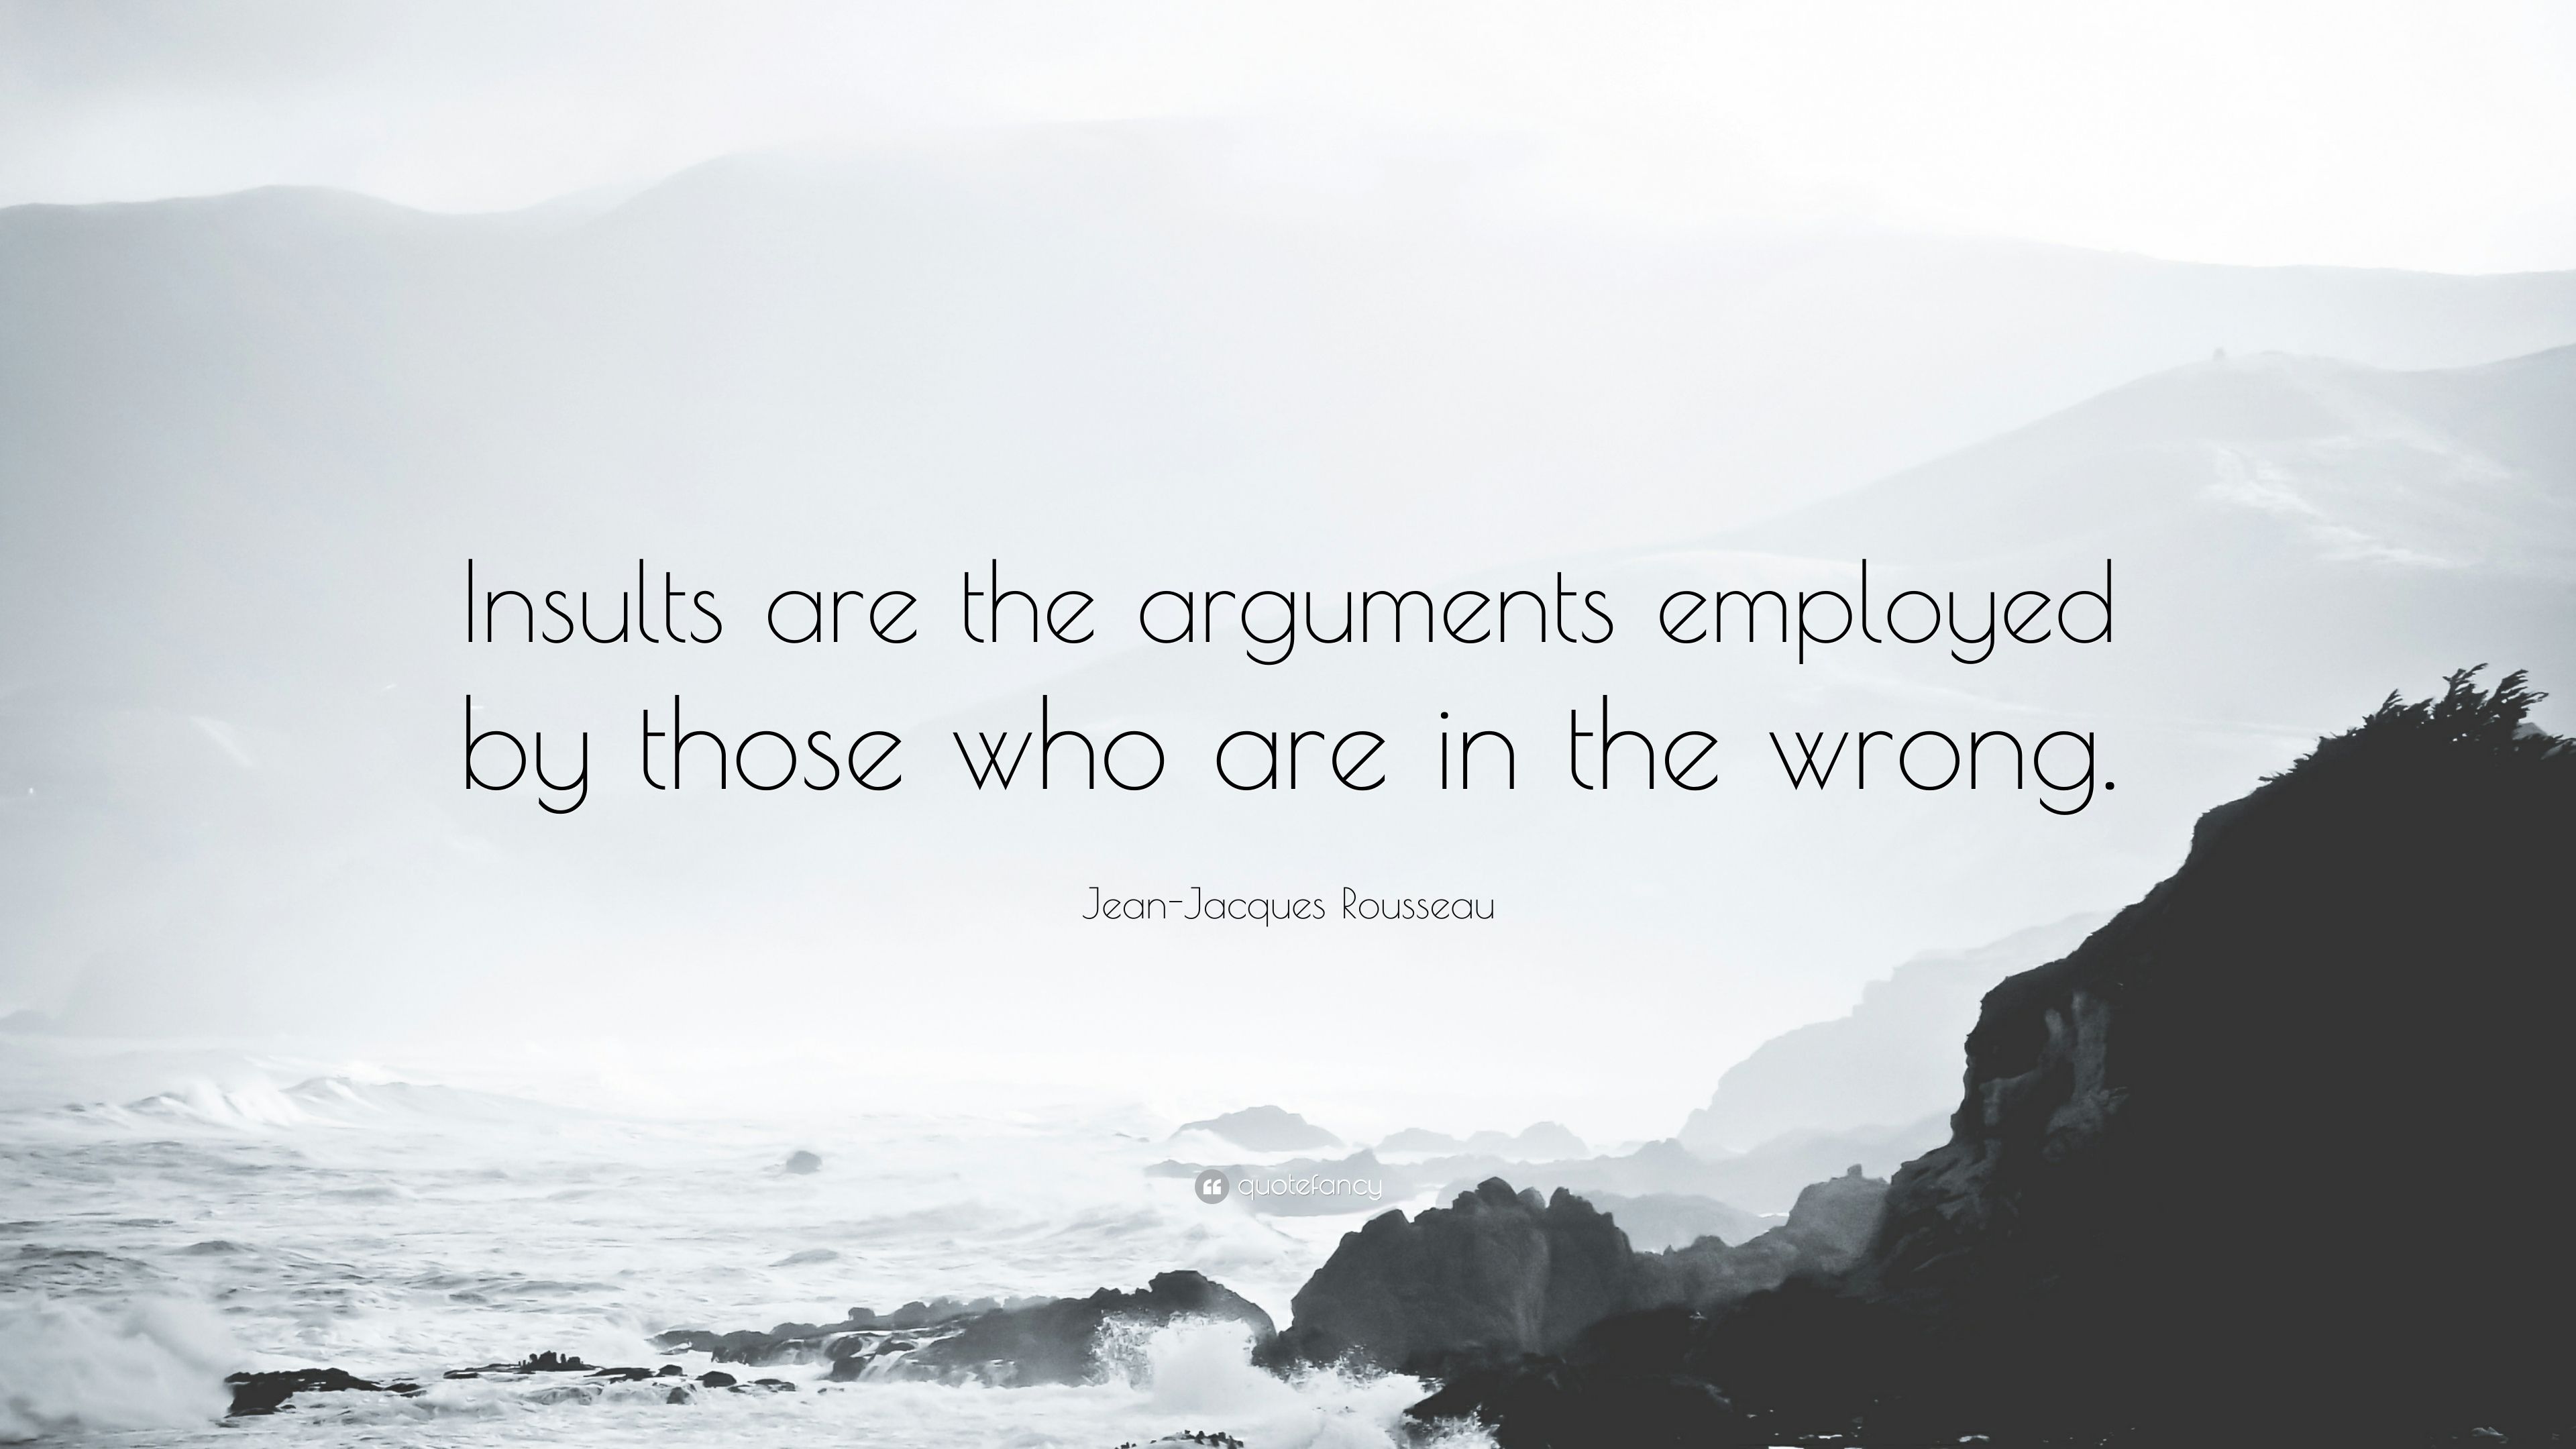 Jean Jacques Rousseau Quote: “Insults Are The Arguments Employed By Those Who Are In The Wrong.” (12 Wallpaper)